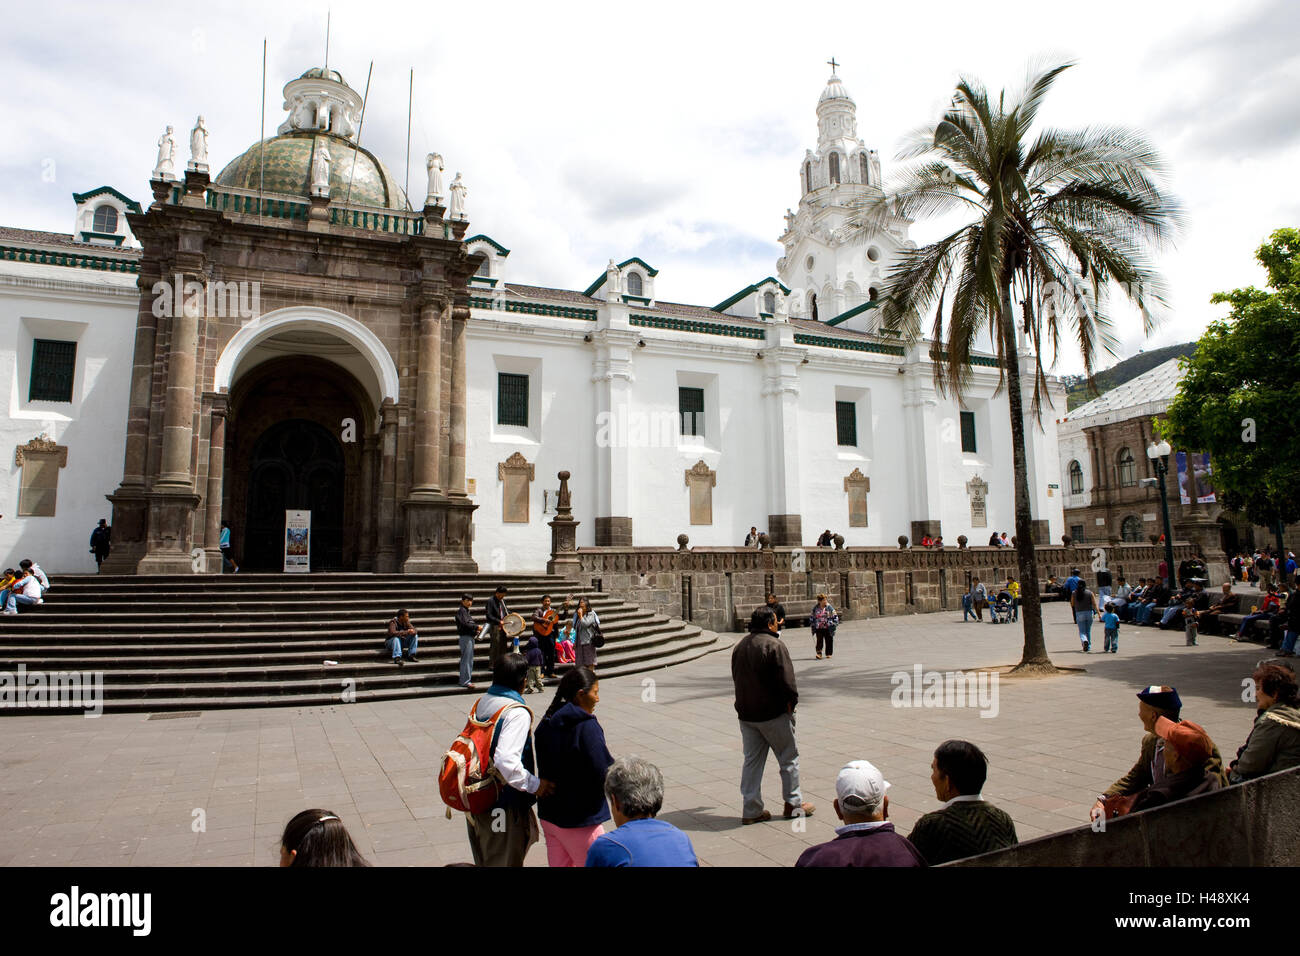 Ecuador, province of Pichincha, Quito, plaza de la Independencia, passers-by, presidential palace, cathedral, detail, South America, town, capital, architecture, building, building, outside, facade, entrance, side entrance, stair, church, steeple, place, Stock Photo